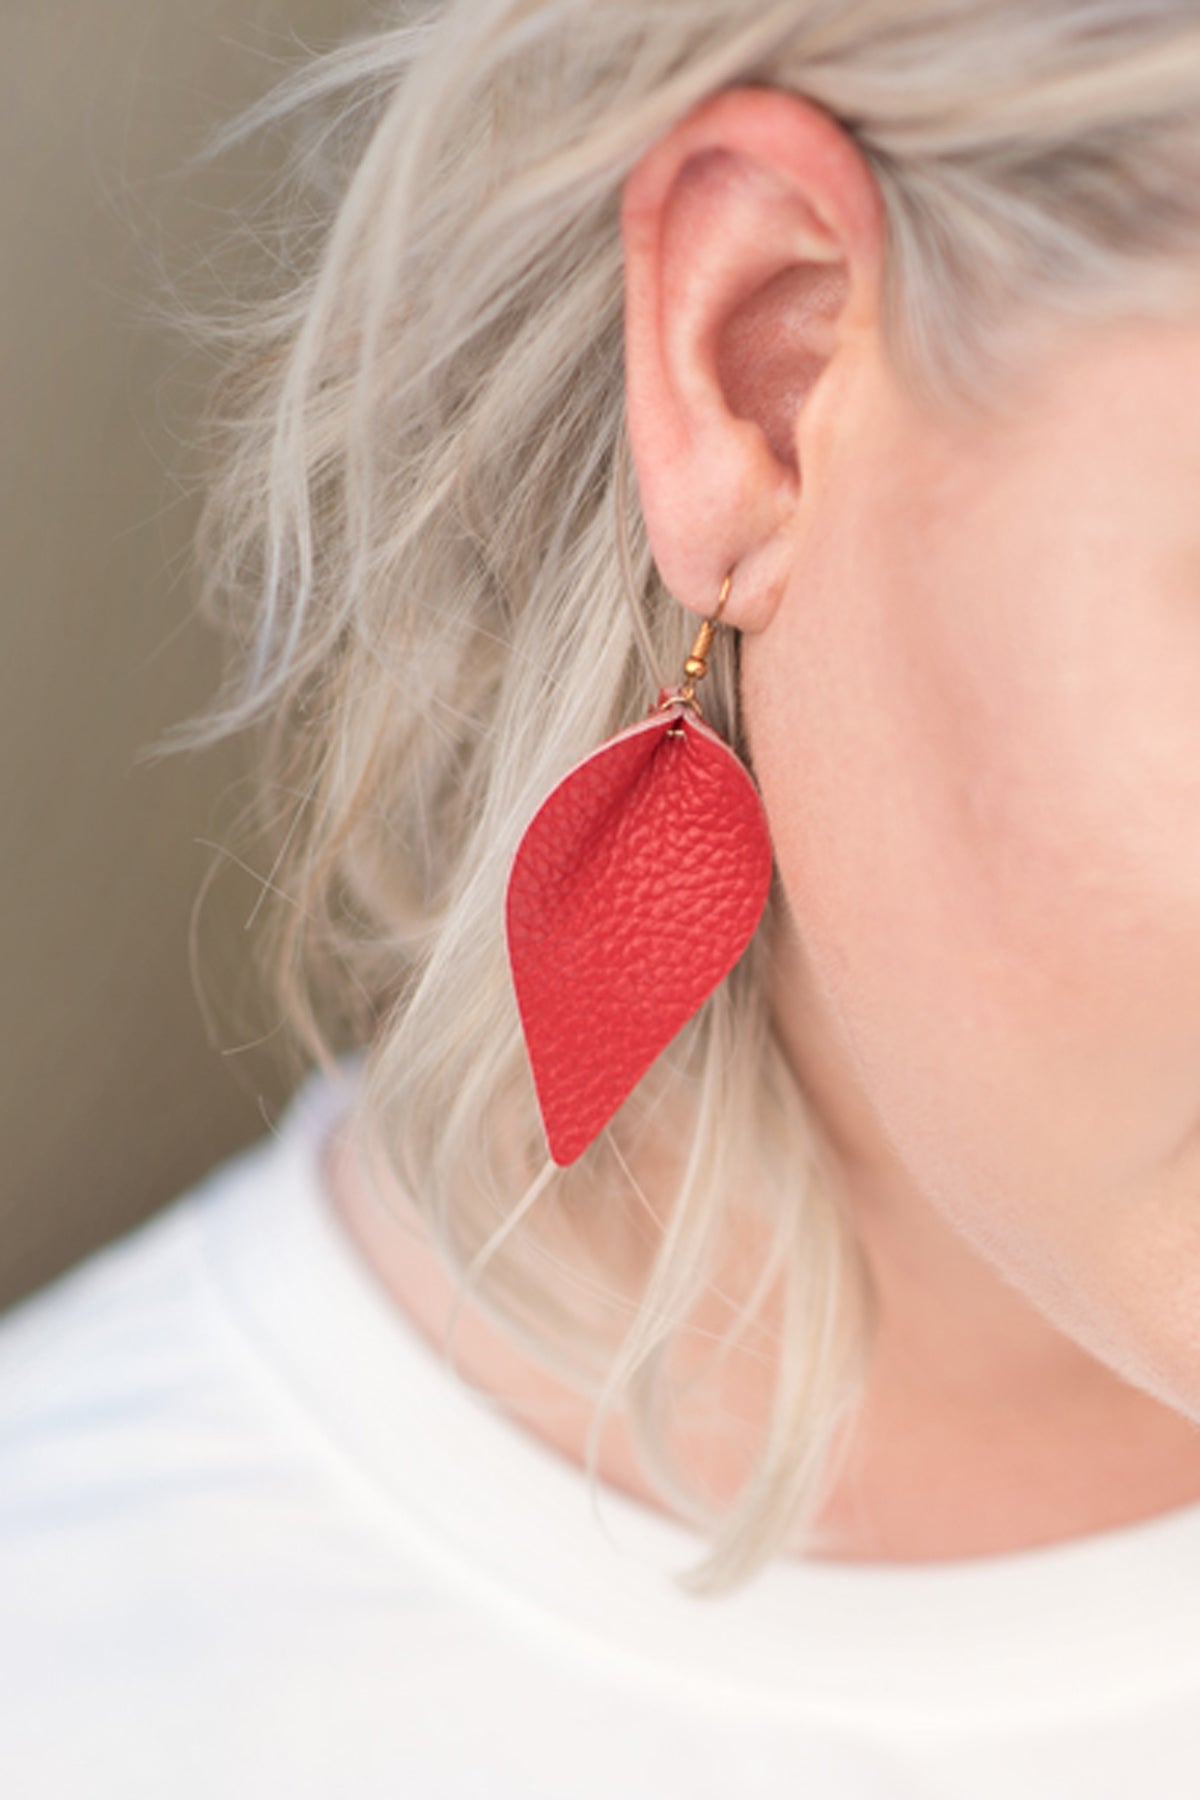 Leather Red Earrings